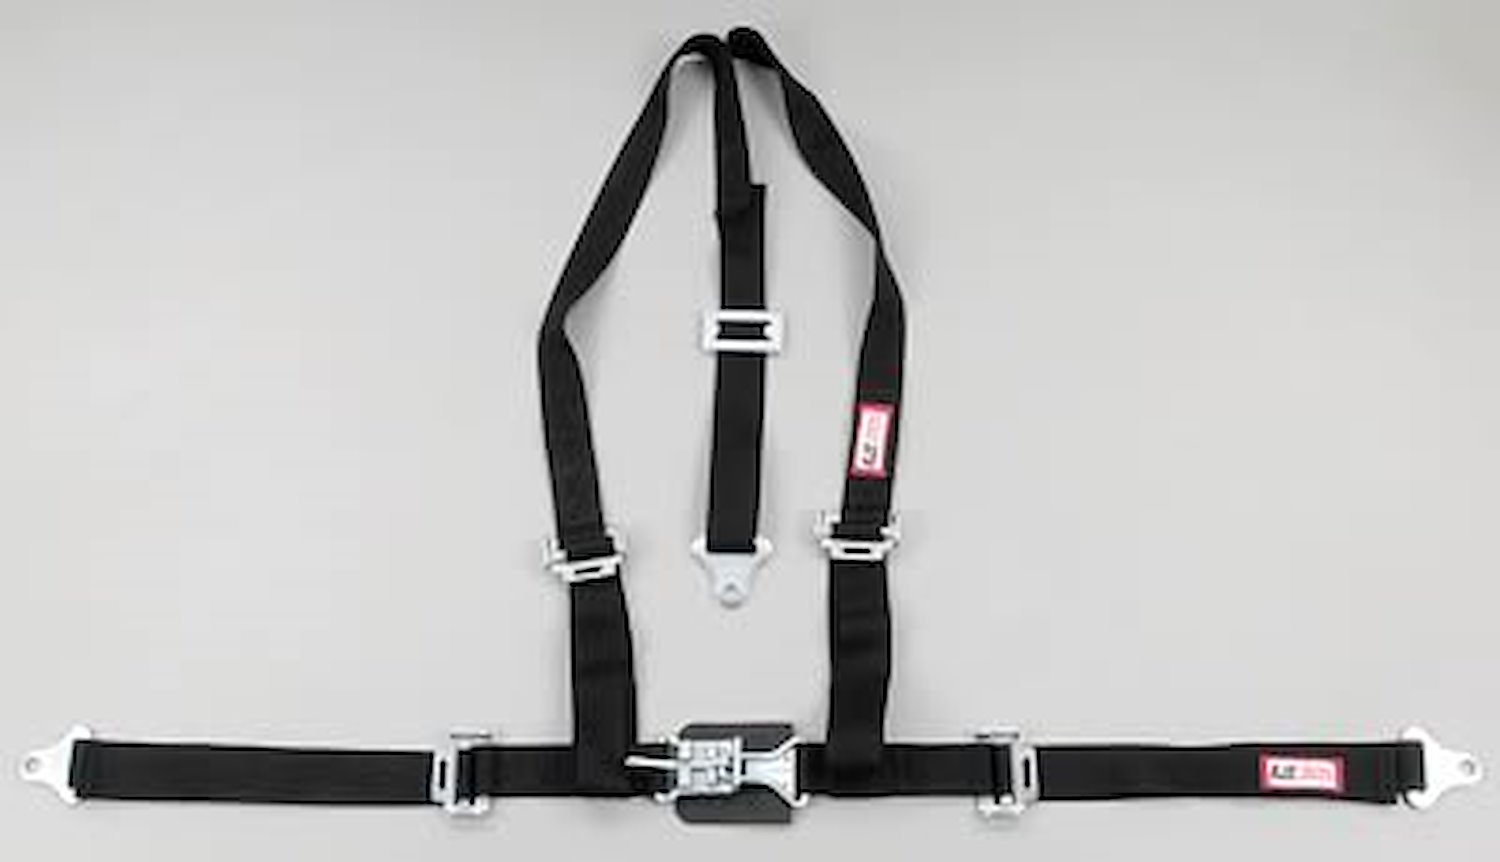 NON-SFI L&L HARNESS 2 PULL DOWN Lap Belt w/Adjuster 2 S.H. Y FLOOR Mount ALL WRAP ENDS YELLOW